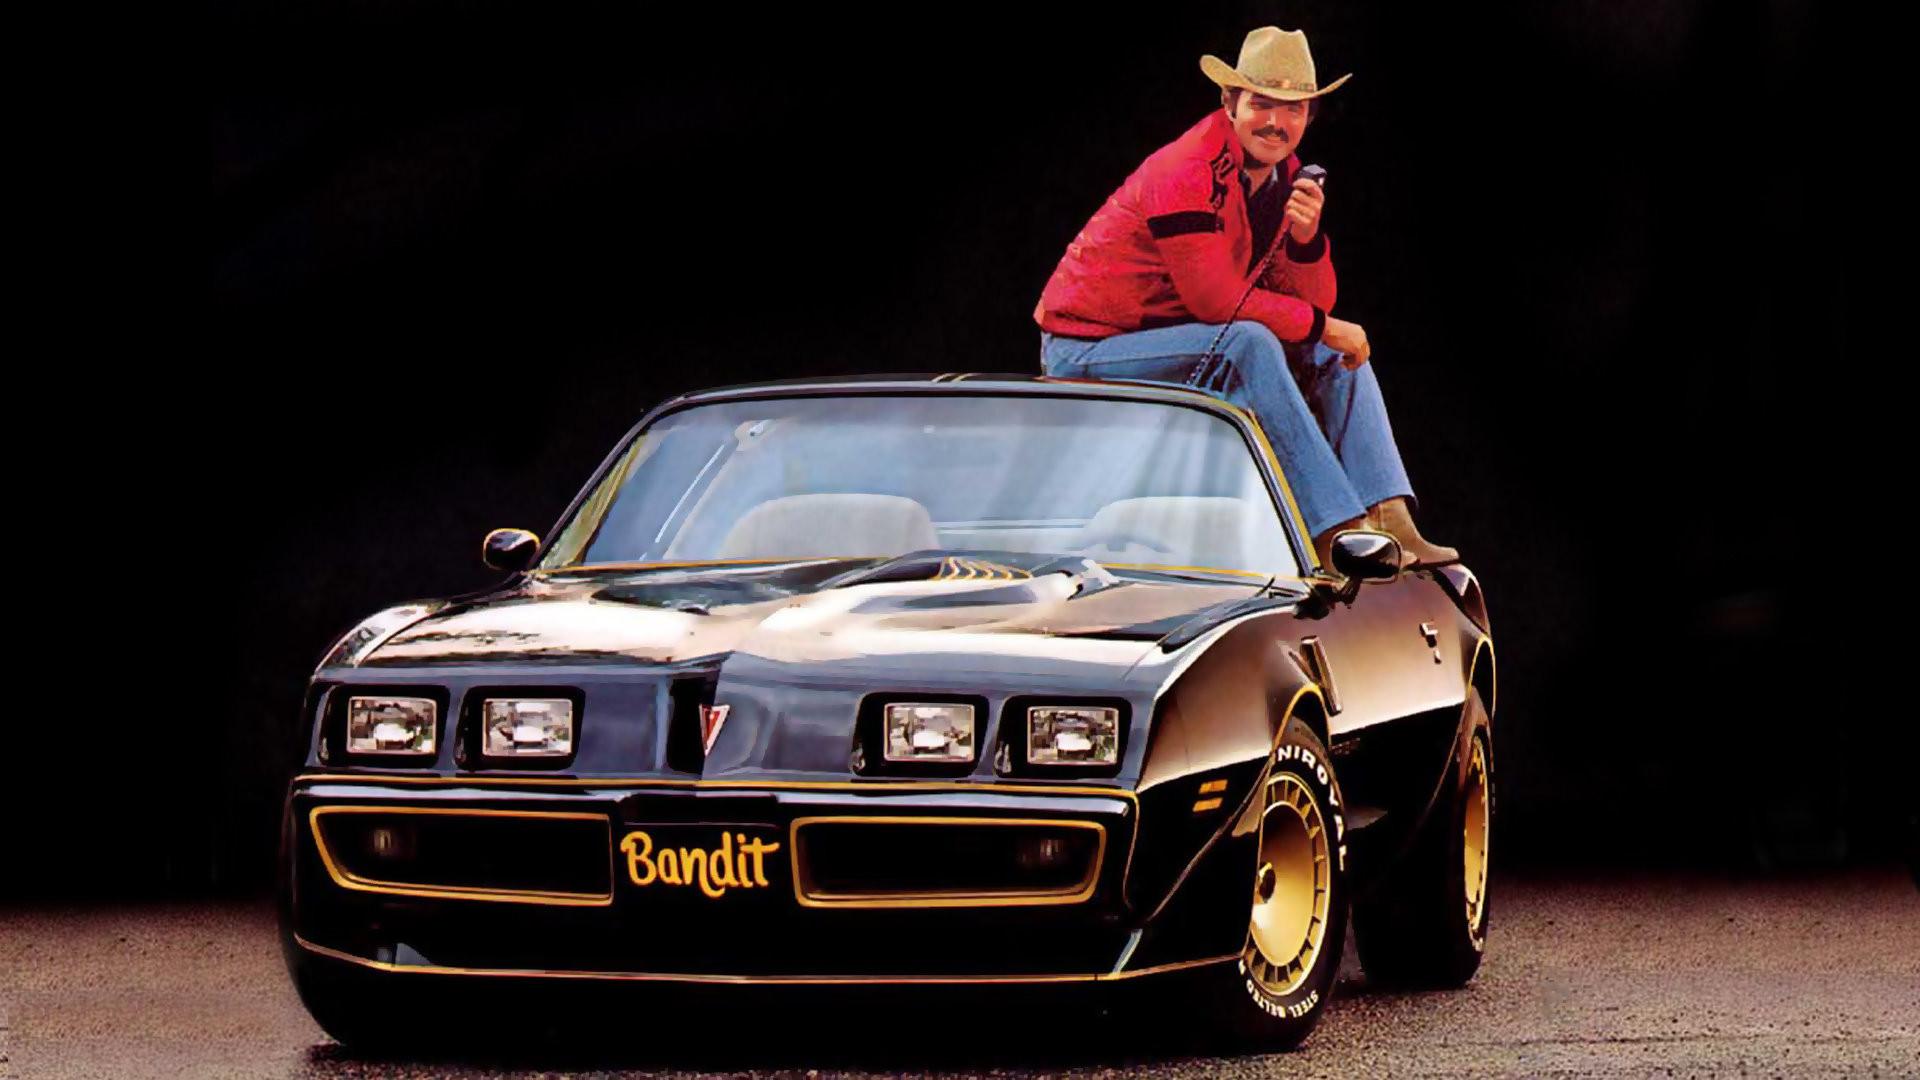 HQ Smokey And The Bandit Wallpapers | File 158.4Kb